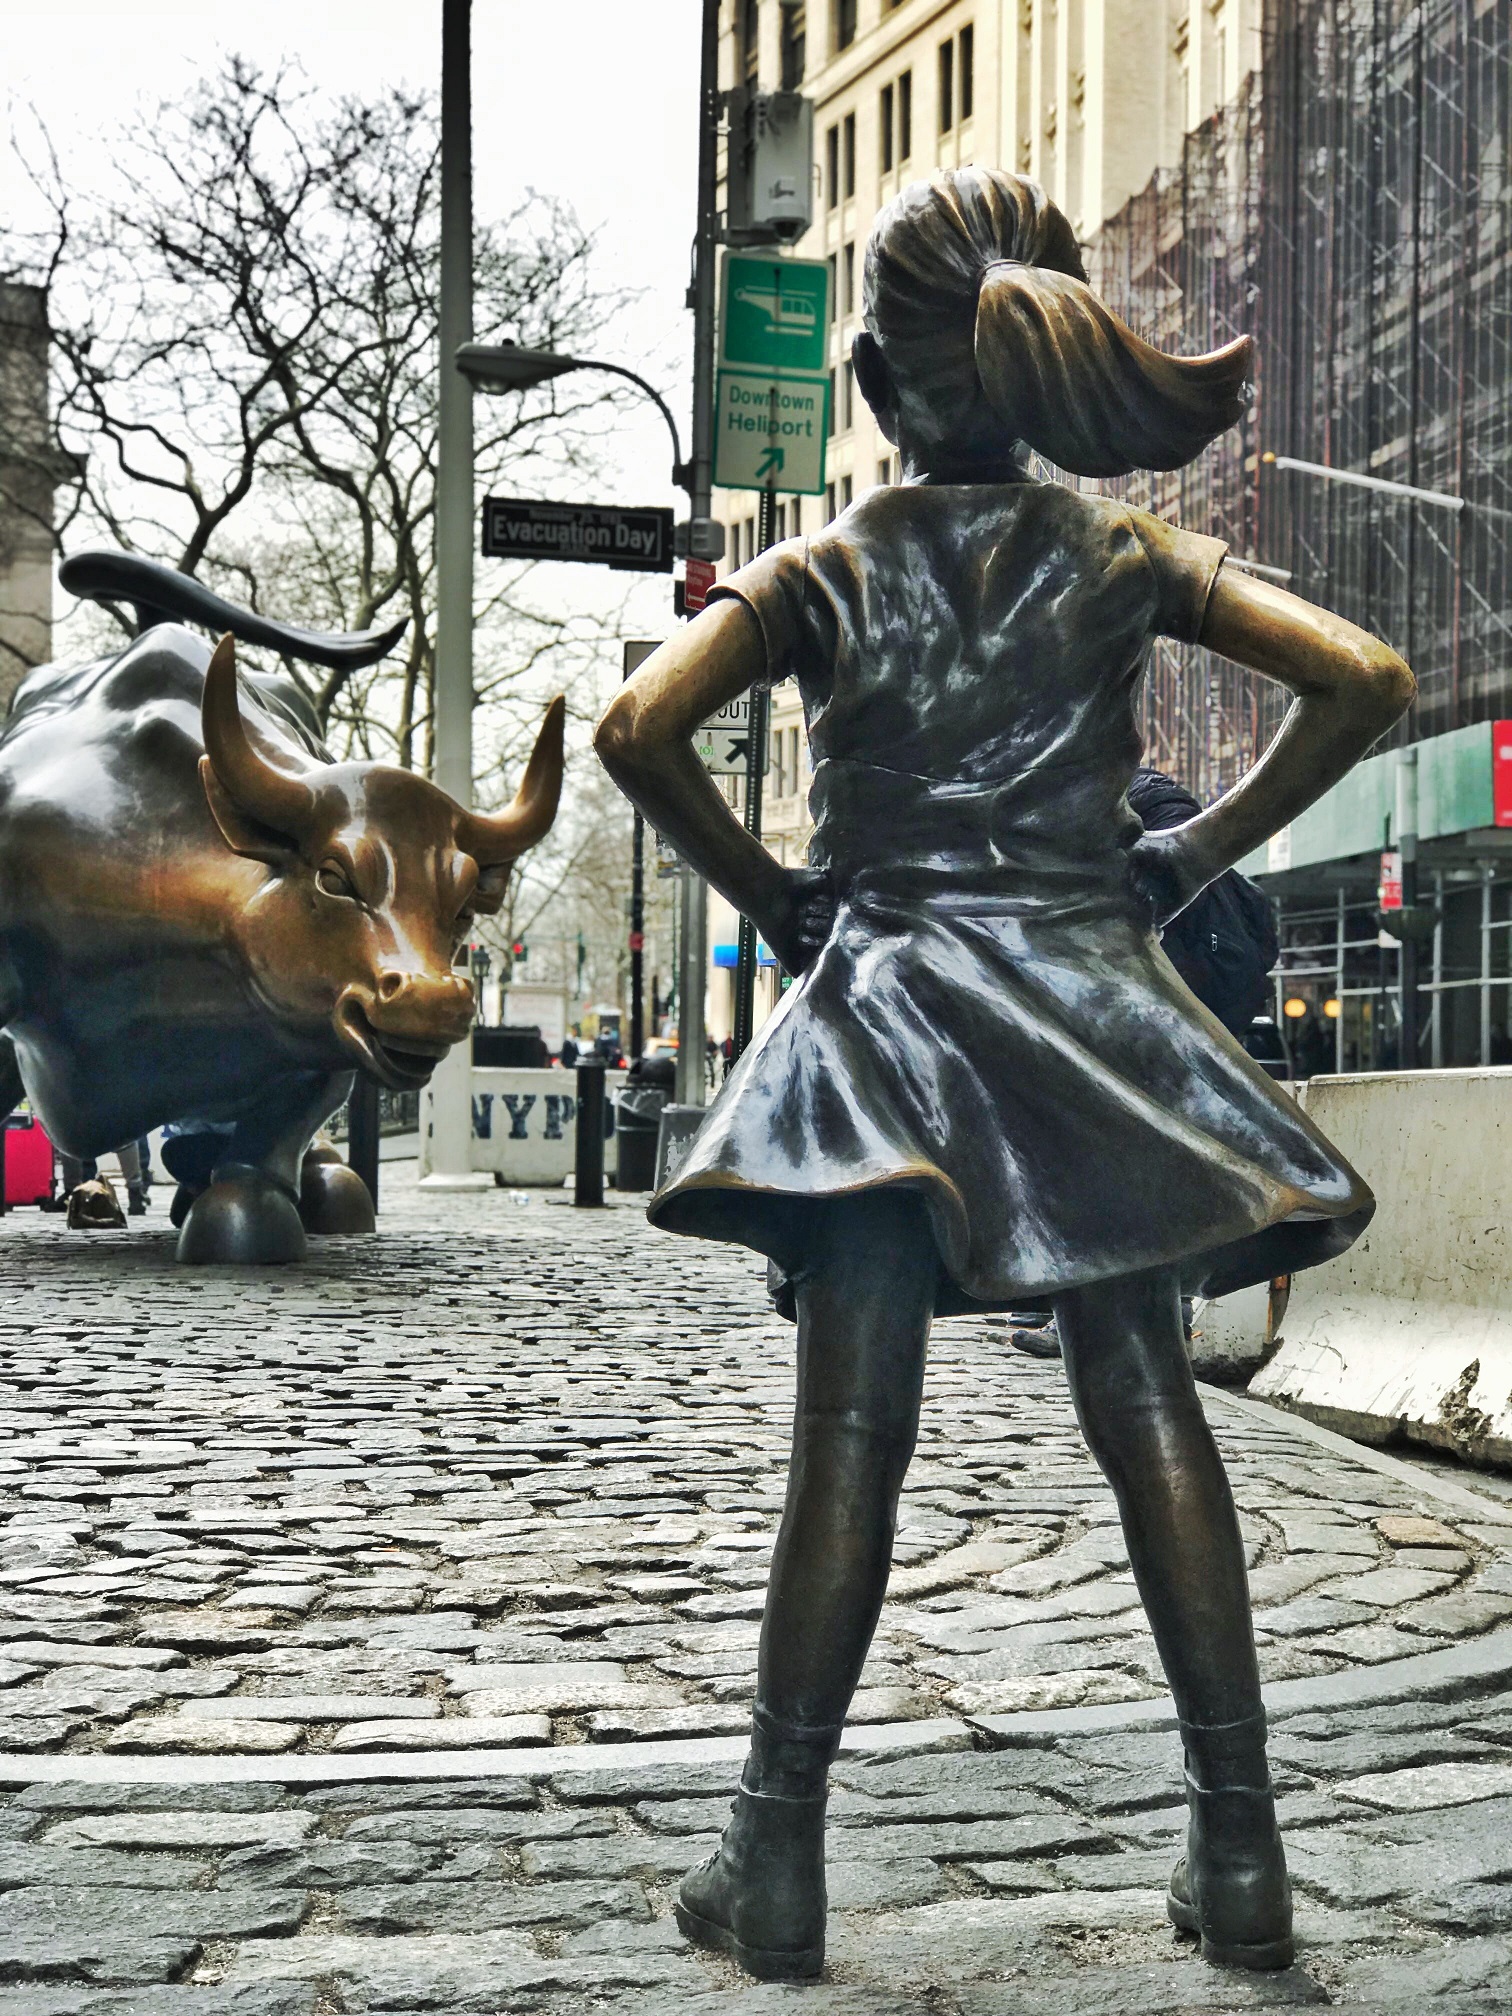 Fearless Girl and Charging Bull